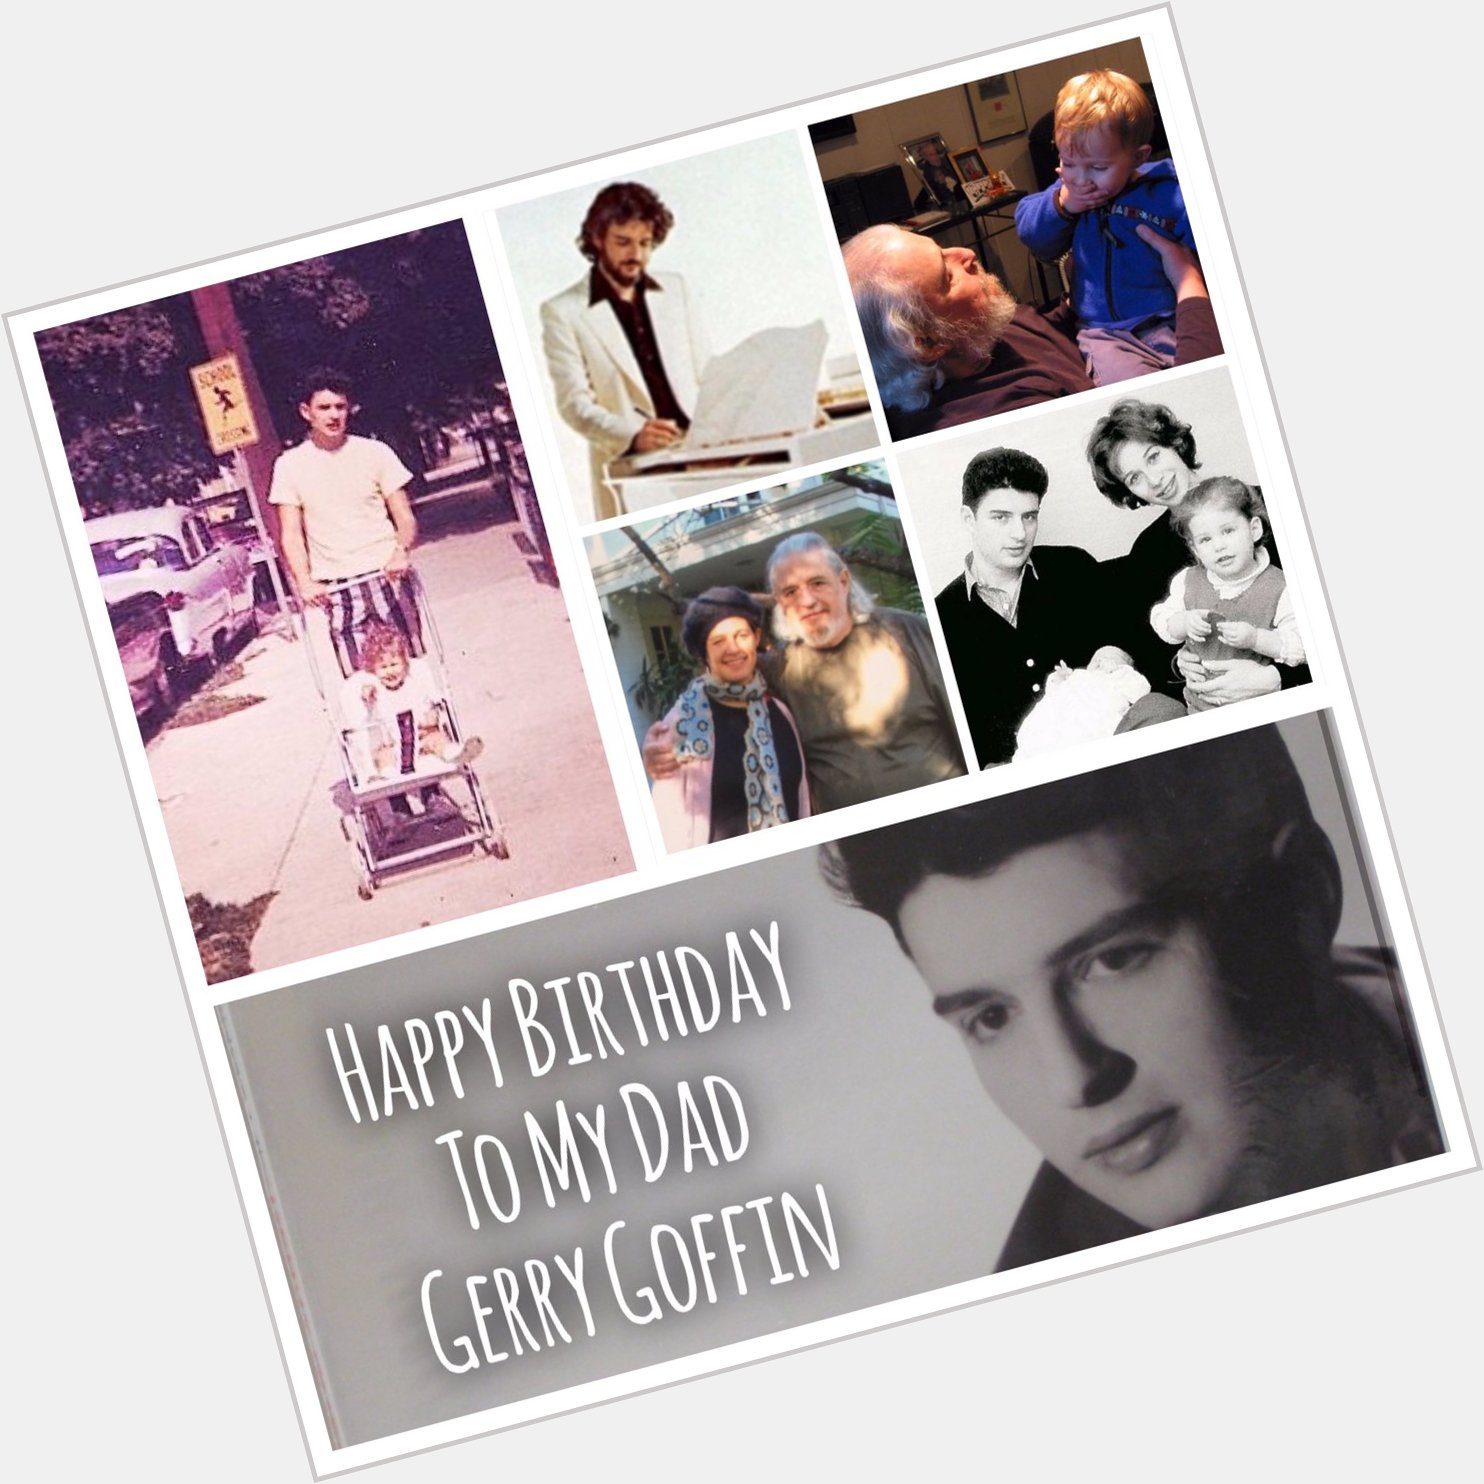 Happy Birthday to my father, the late great Gerry Goffin. You are deeply missed. 